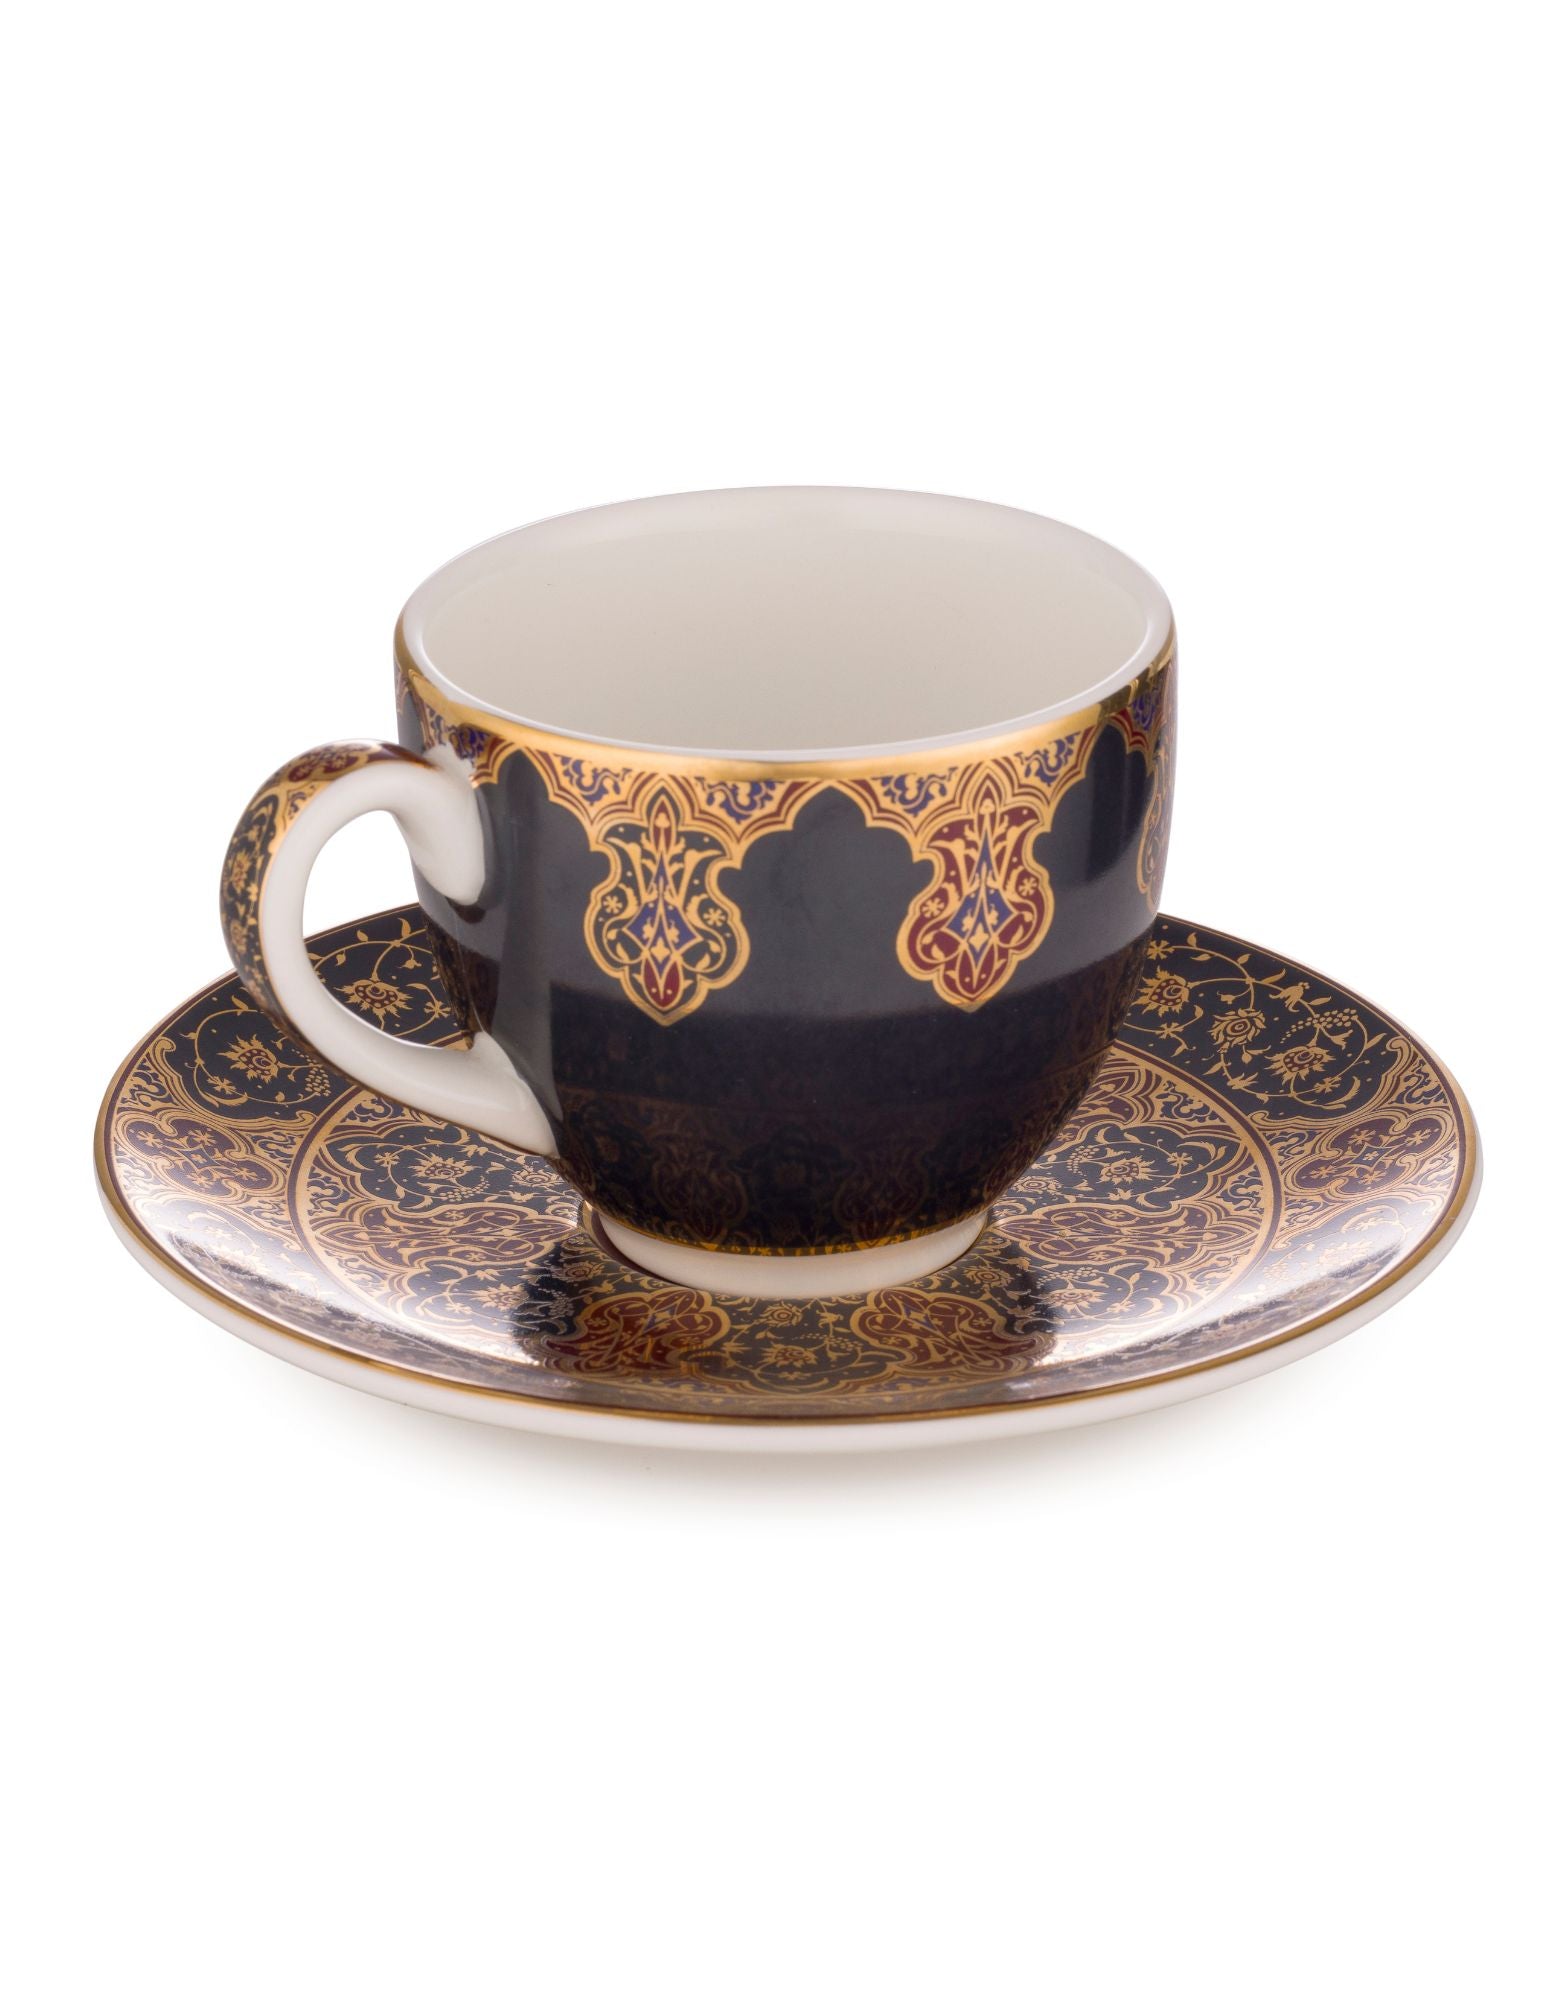 Begum Cup and Saucer in black 